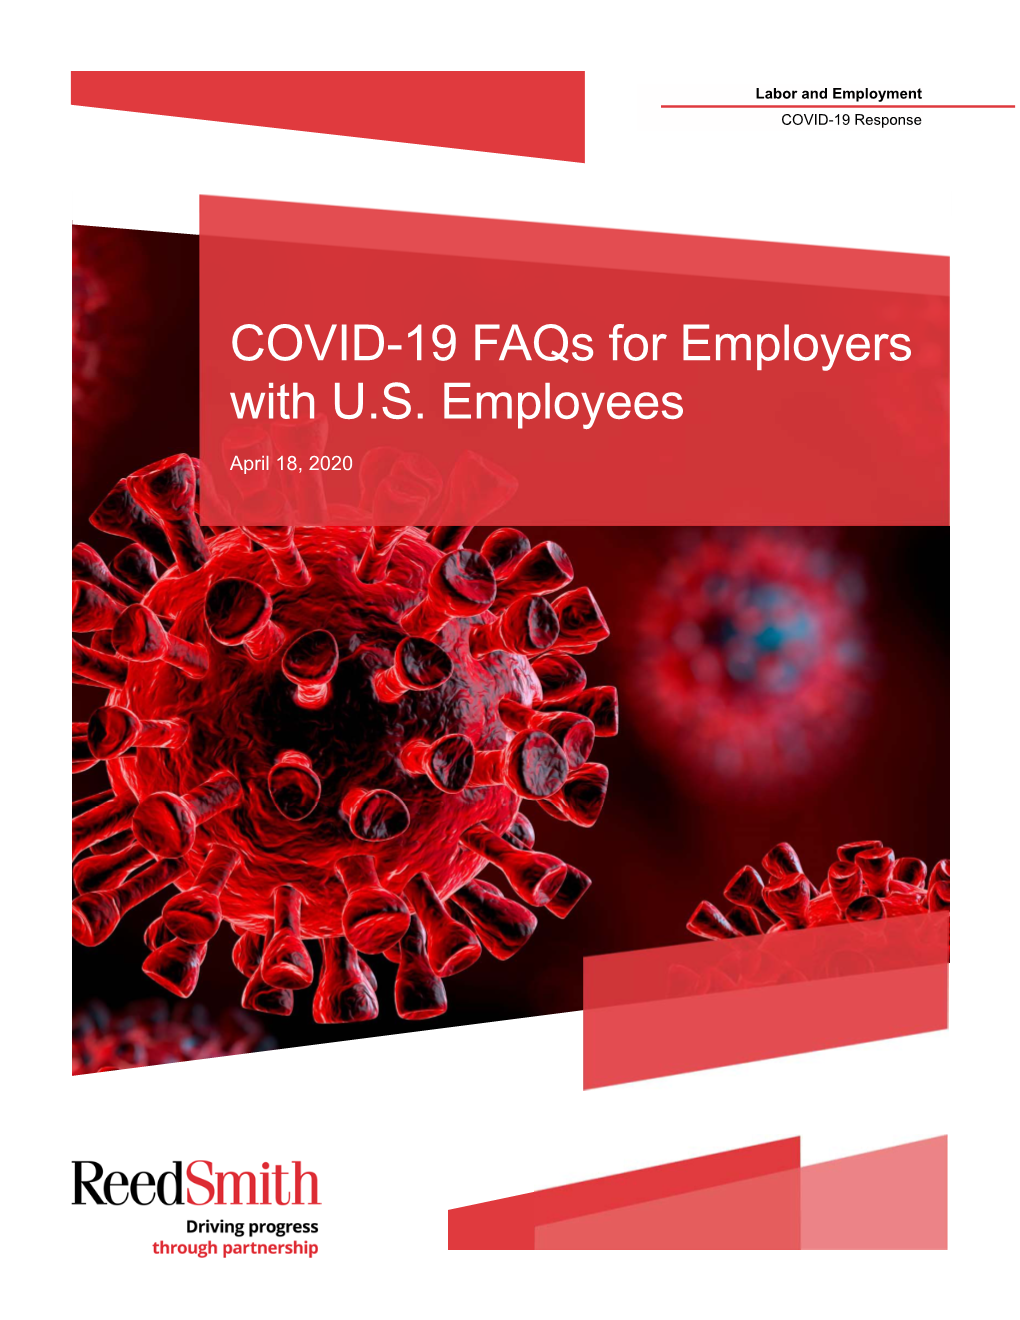 COVID-19 Faqs for Employers with U.S. Employees